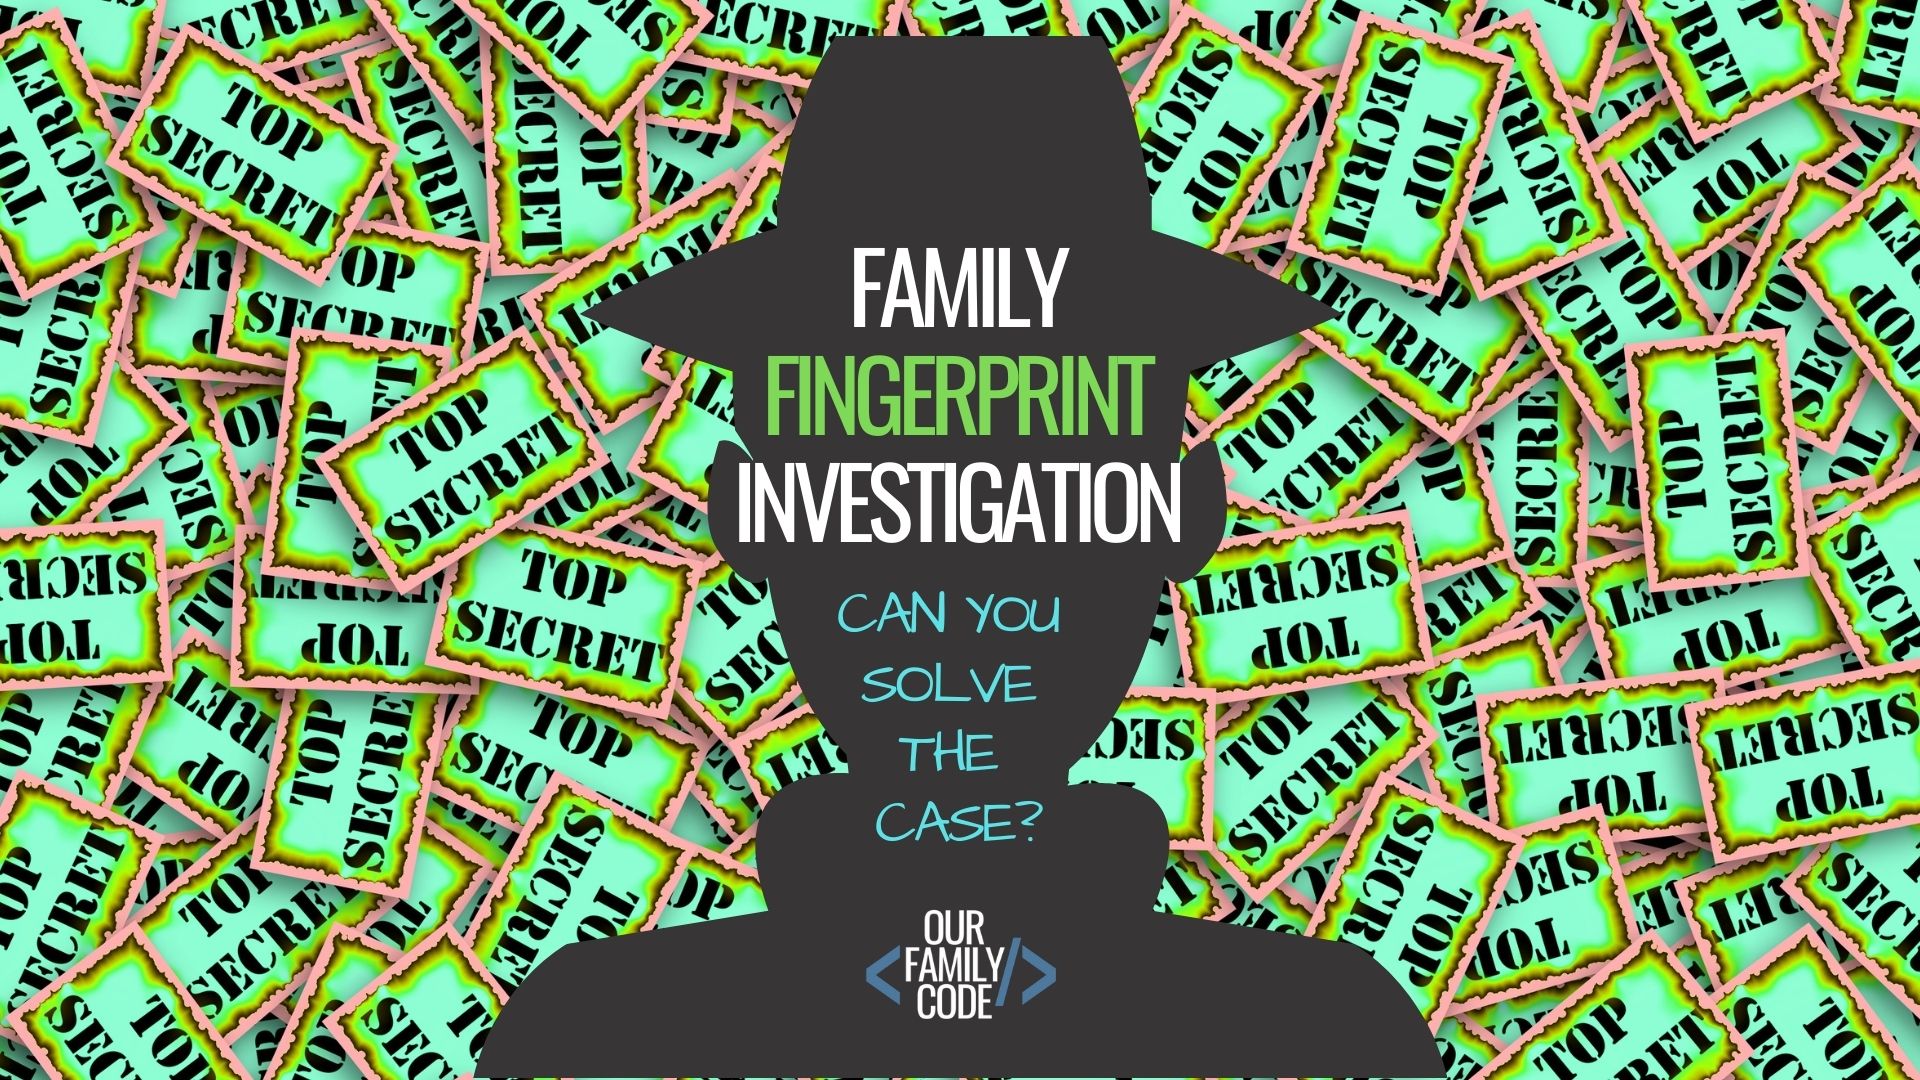 Learn the science of fingerprints and how they are used to identify people in crime investigations. #STEAM #STEM #fingerprintscience #scienceactivitiesforkids #STEAMactivities